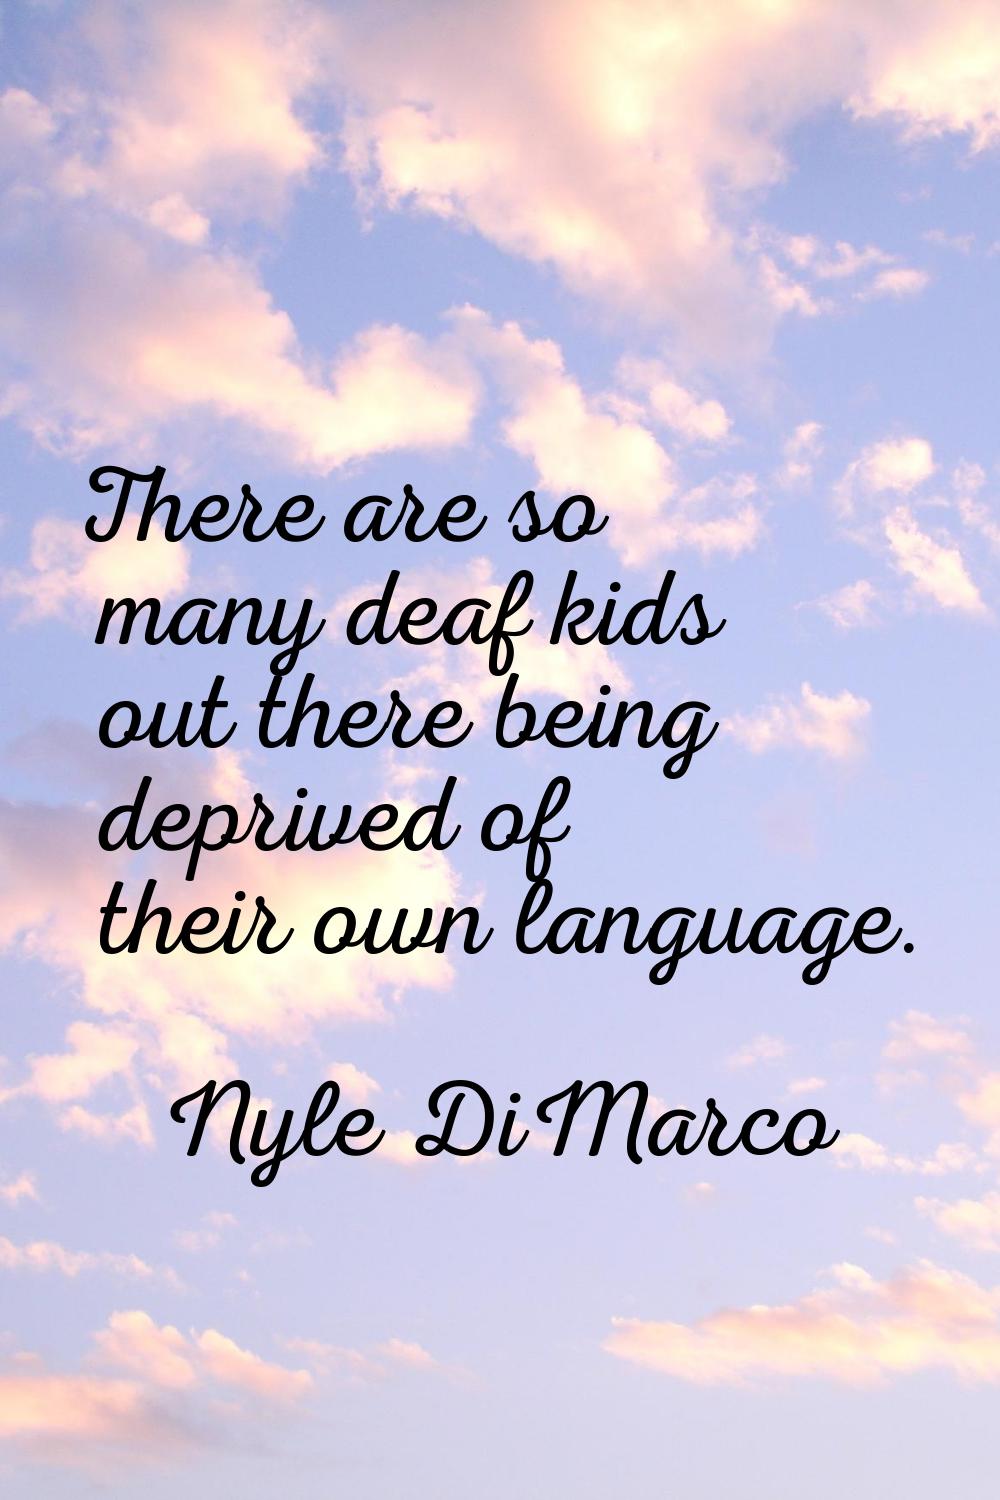 There are so many deaf kids out there being deprived of their own language.